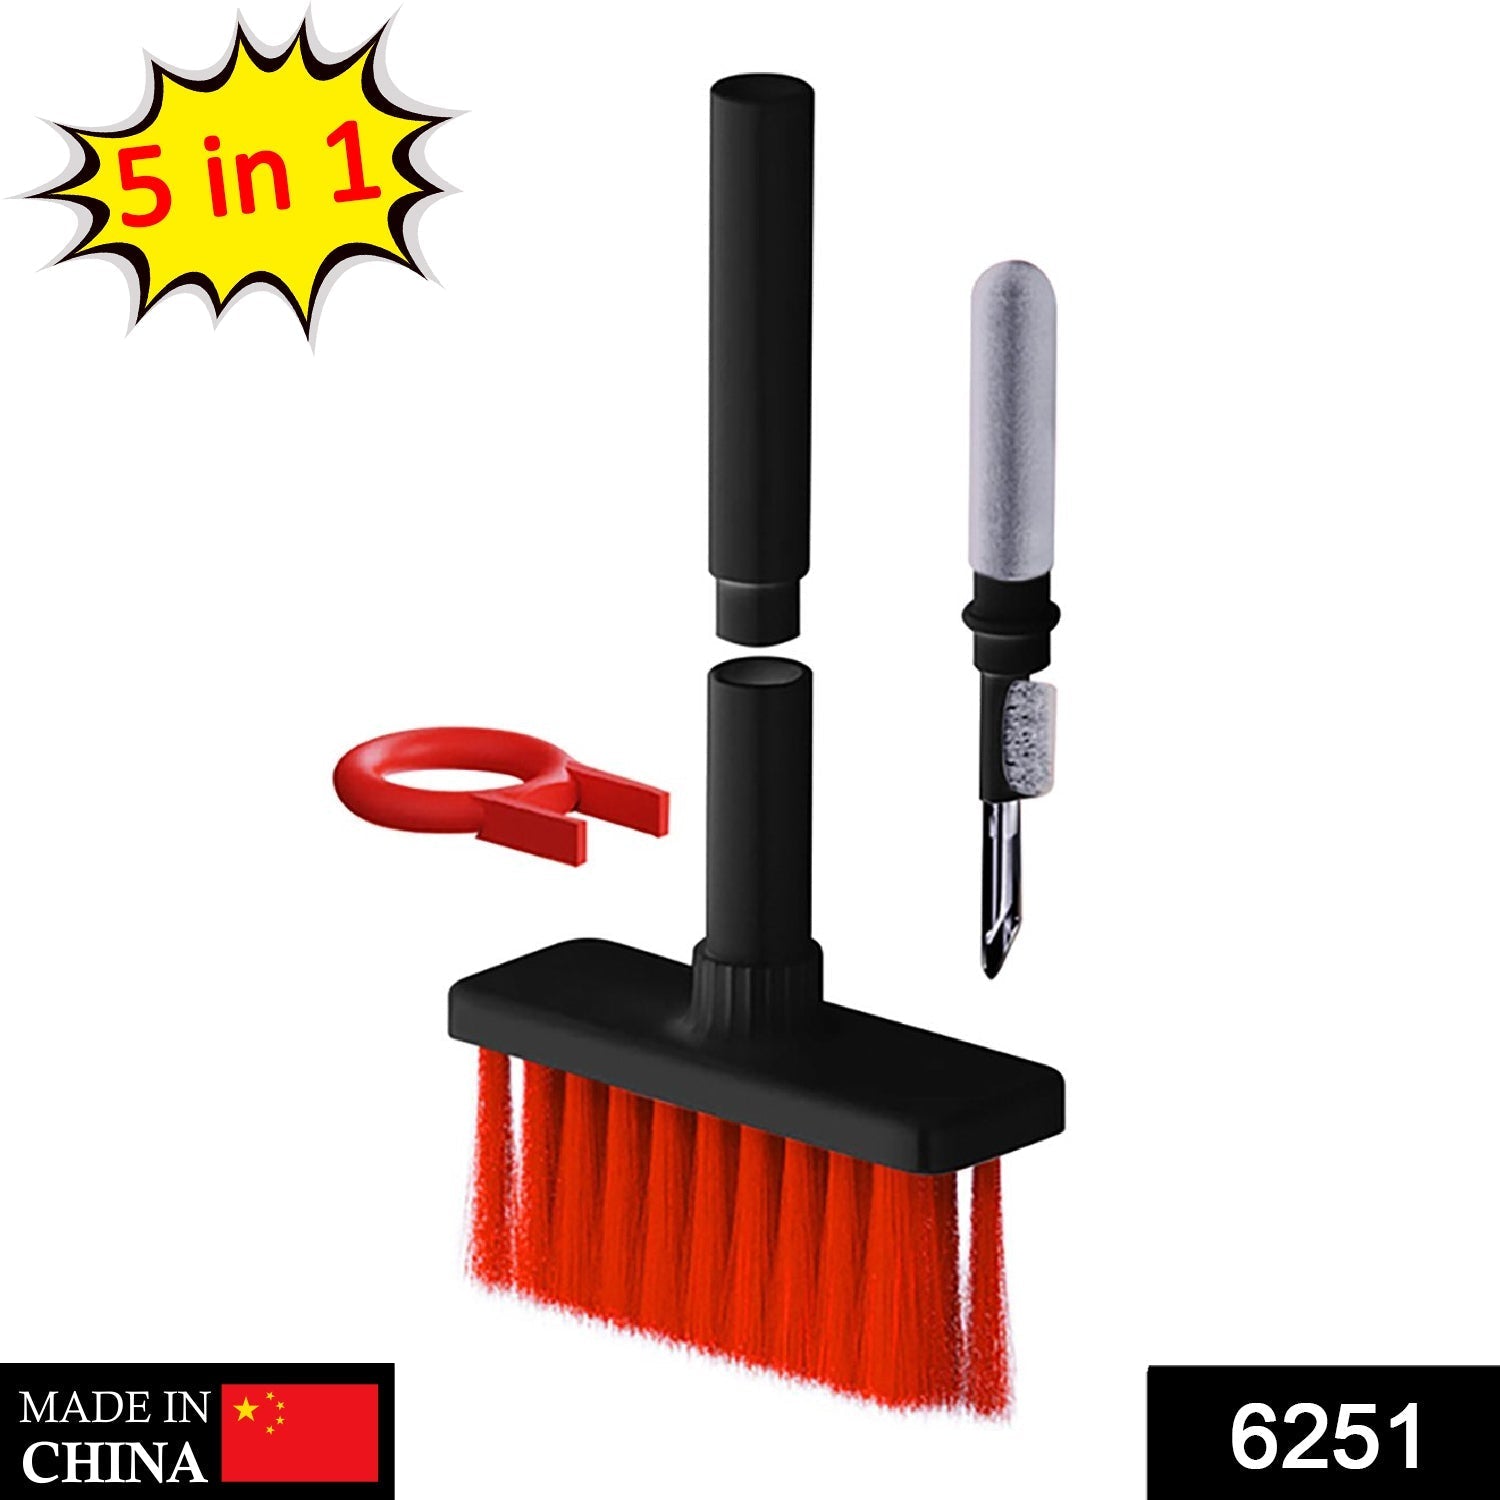 6251 5in1 Multi-Function Soft Dust Clean Bush for Computer Cleaning, with Corner Gap Duster Keycap Puller Remover for Gamer Pc 